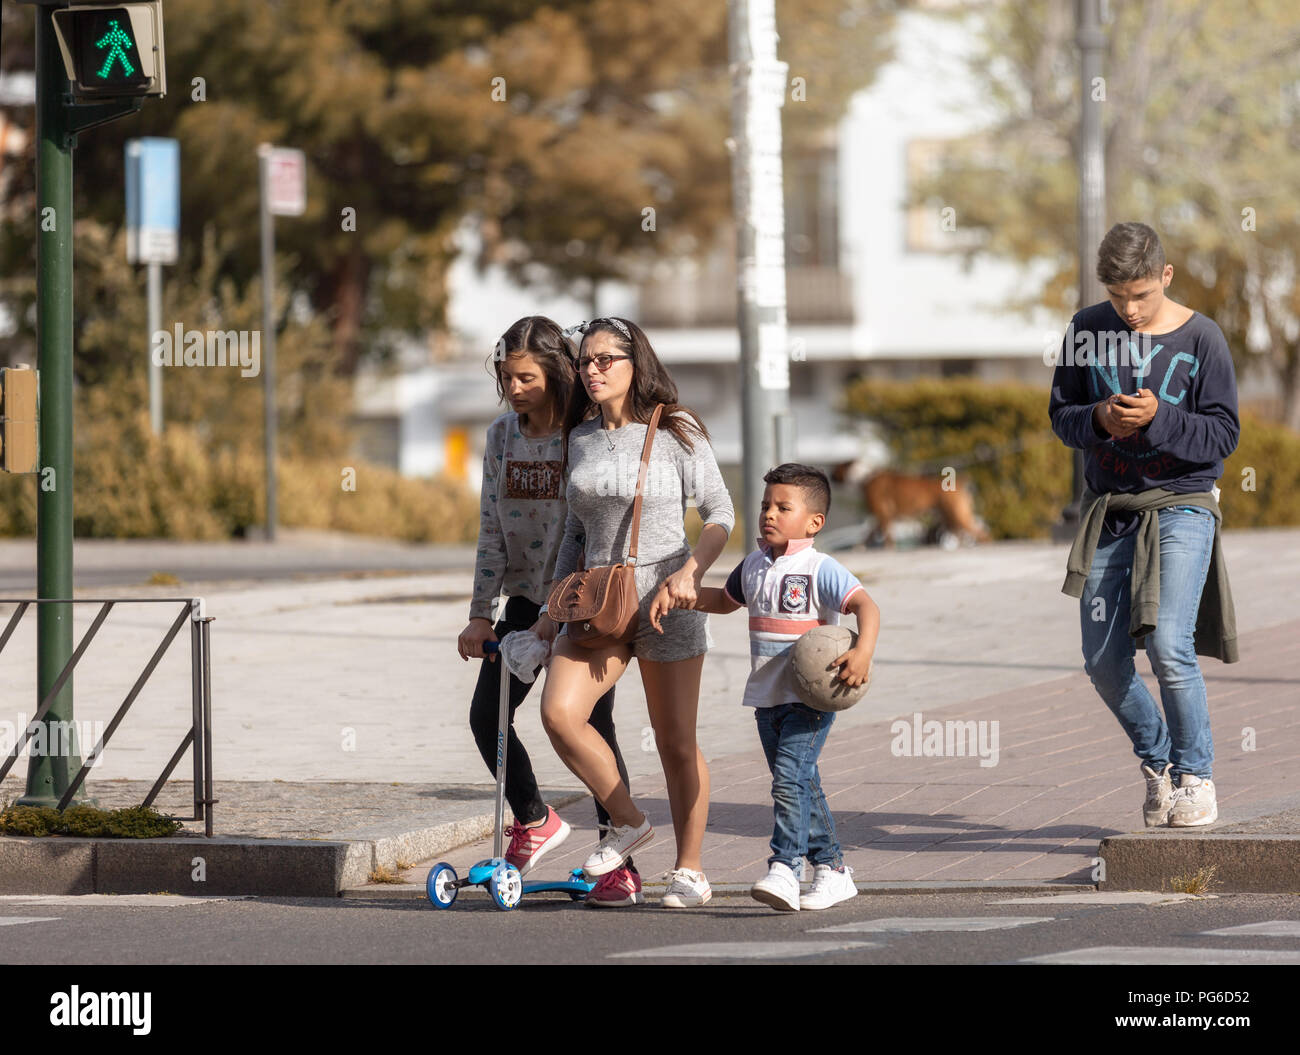 This latino family is starting to cross the street when green man icon is on. Stock Photo